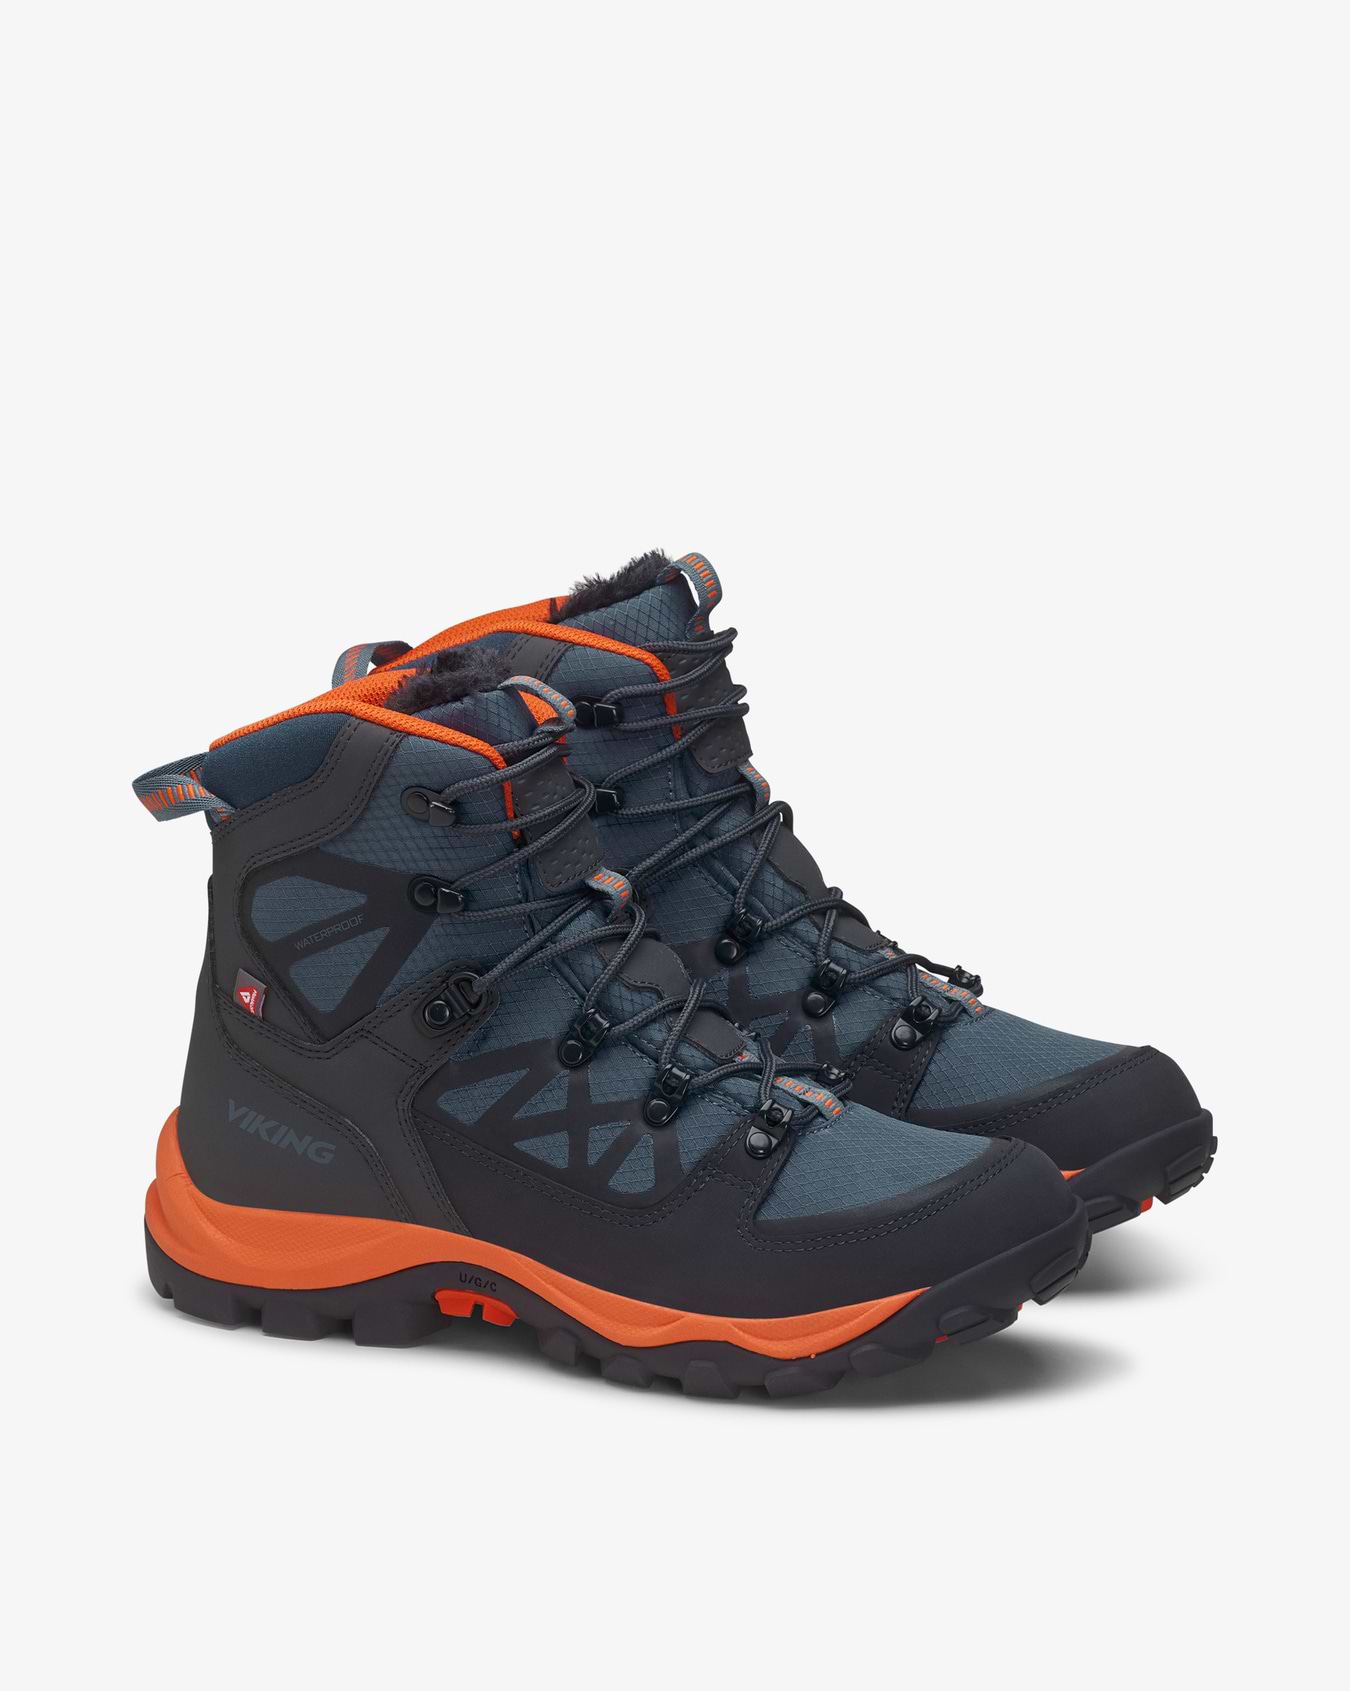 Constrictor High WP M Navy/Demin Hiking